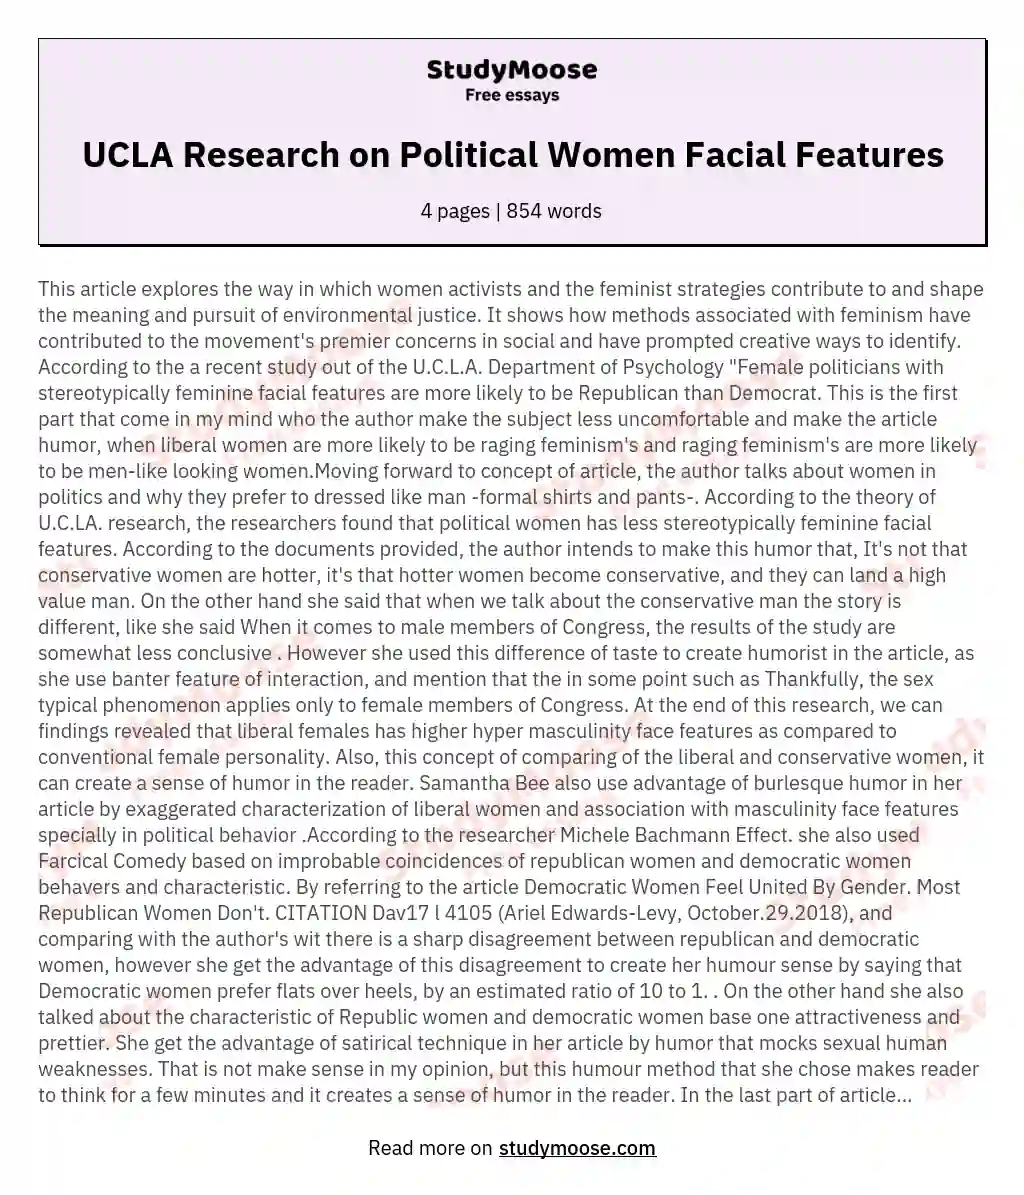 UCLA Research on Political Women Facial Features